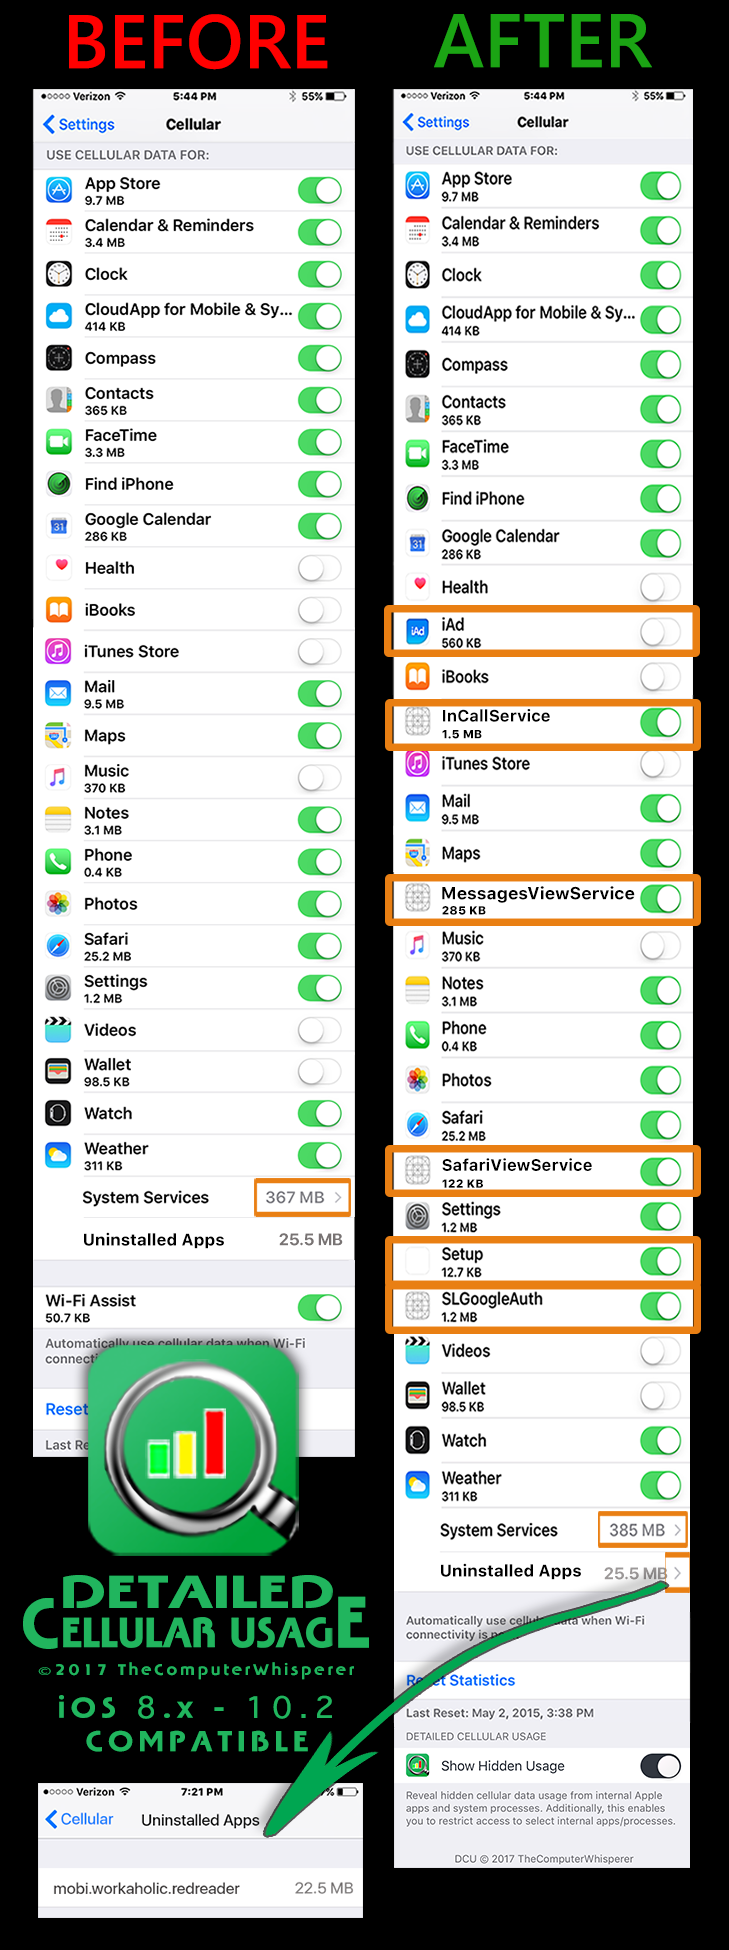 Before and After comparison image of App Cellular Data Usage.